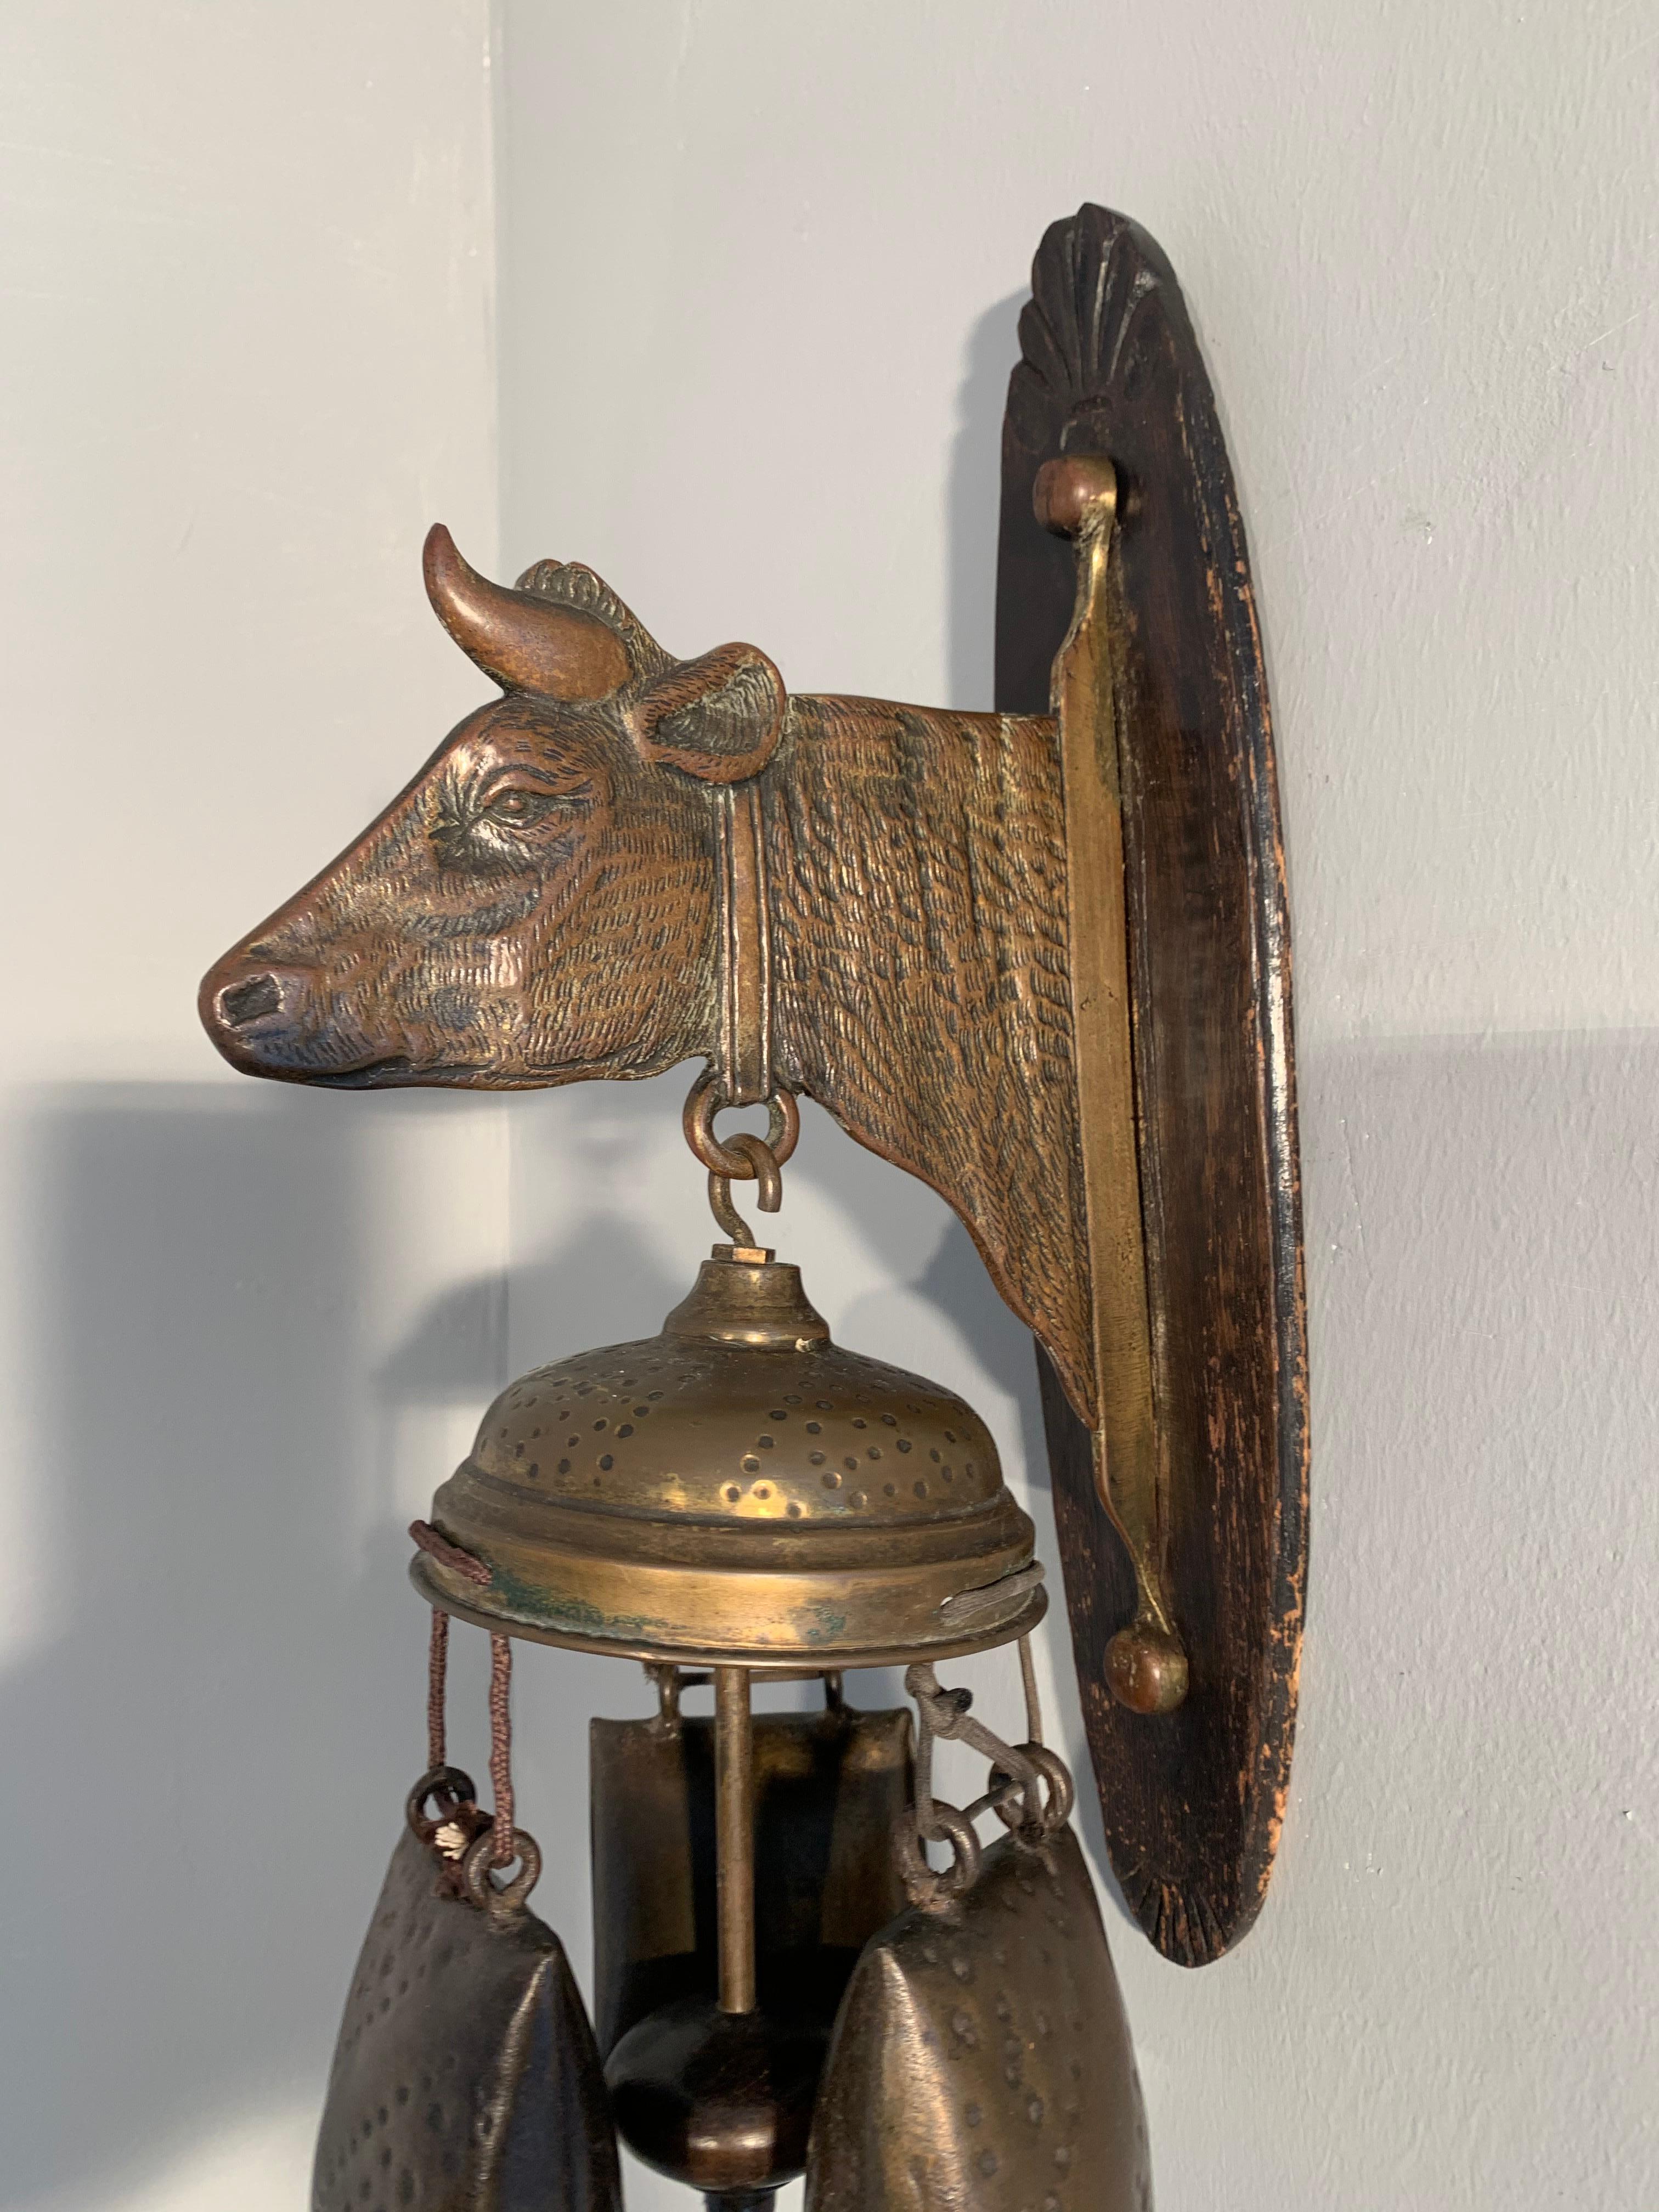 Very rare and striking (pun intended) Arts & Crafts gong / bell.

This totally original house gong with a cow sculpture even comes with the original and perfect condition striker. The beautifully patinated cow is are a real joy to look at and the